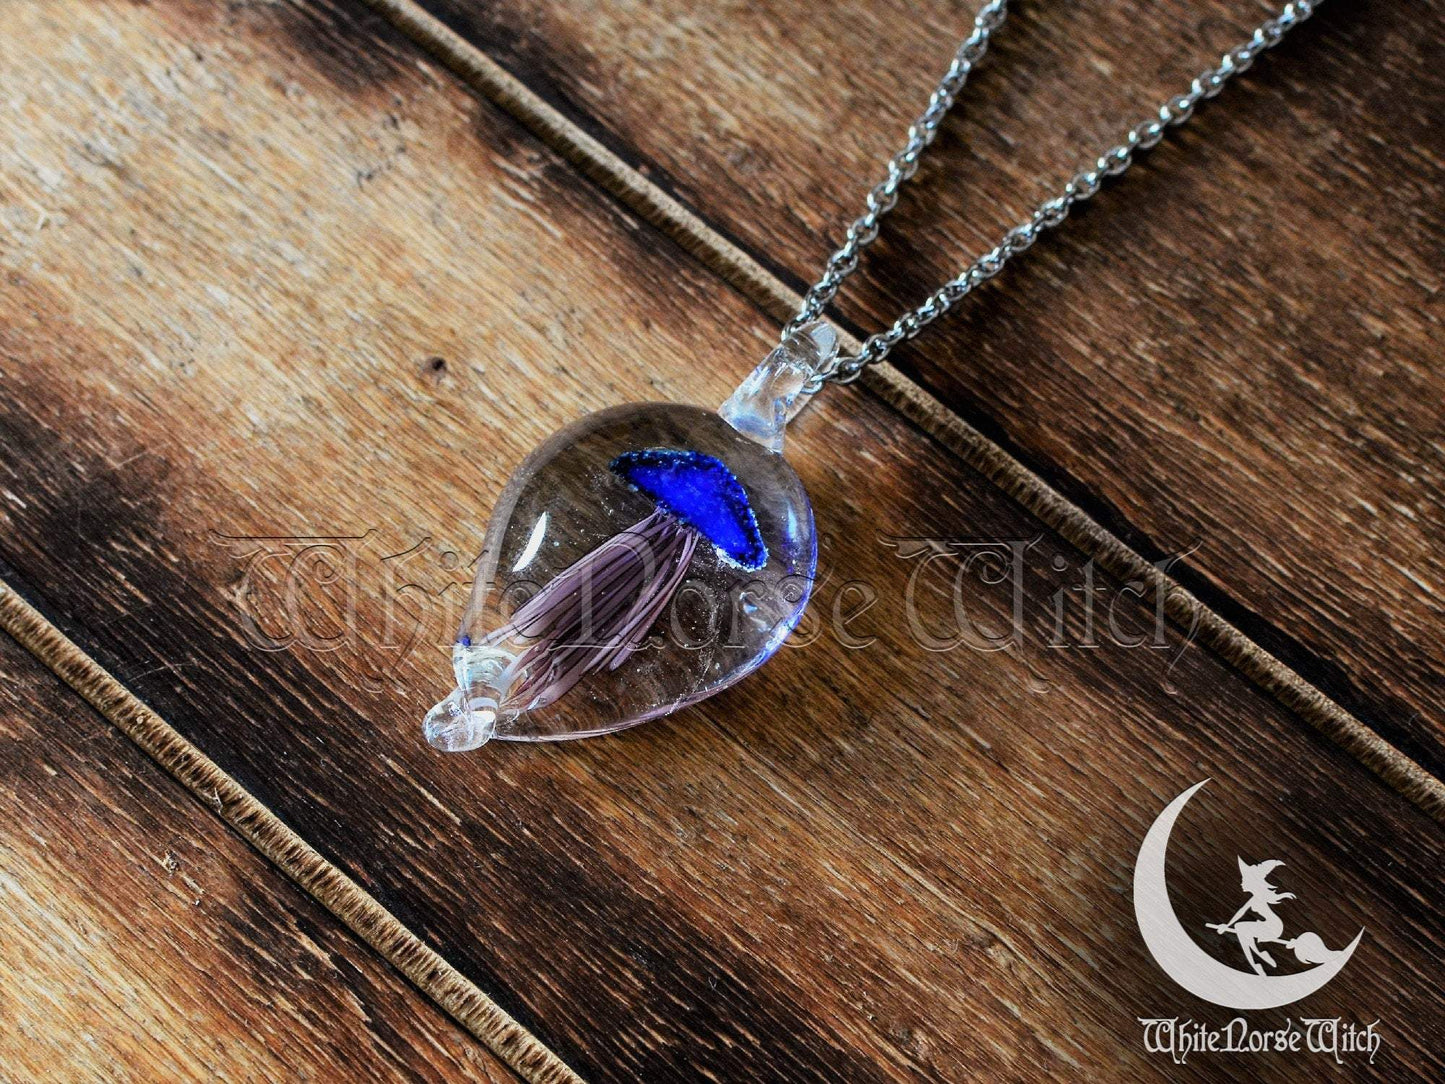 Glass Jellyfish Necklace, Blue Glowing Jelly fish Pendant, Magical Glow in the Dark Wish Charm, Jelly Fish Witchy Gift TheNorseWind